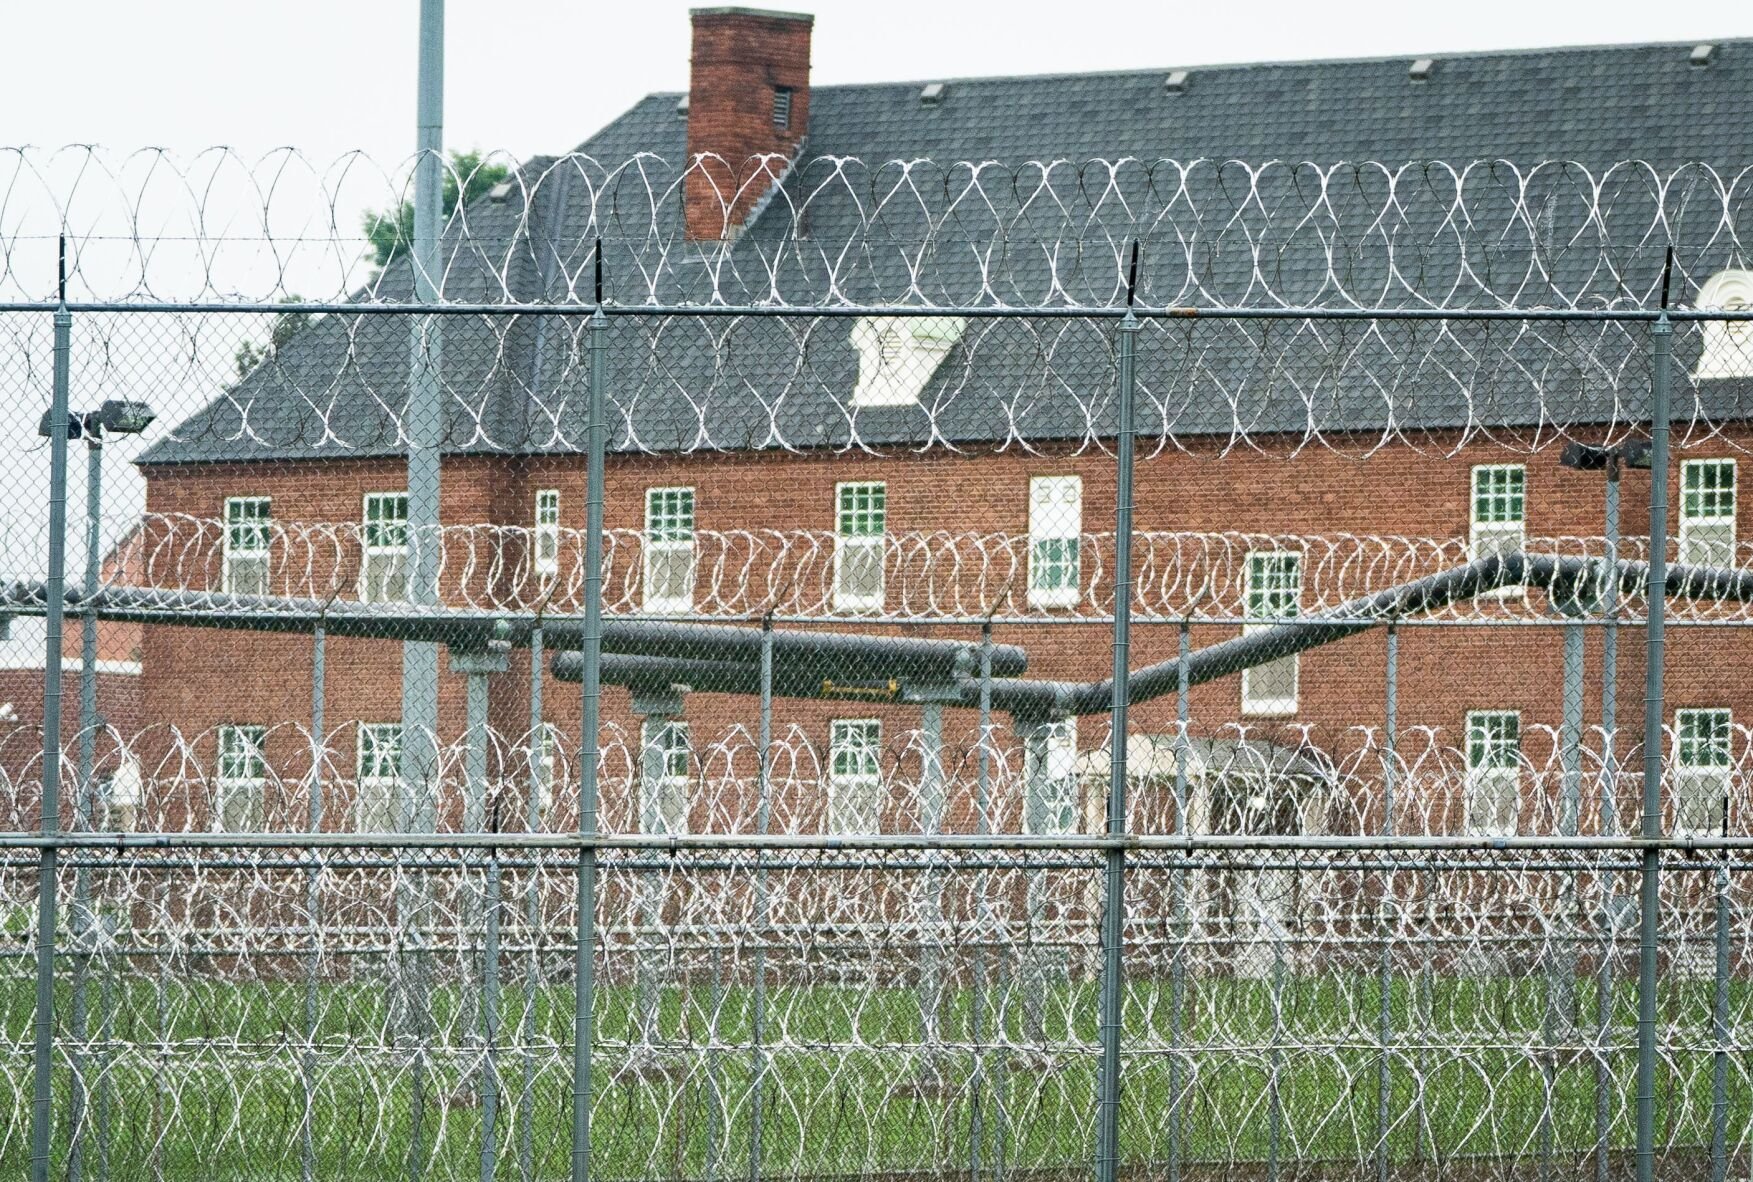 NY prison guards accused of sex abuse of hundreds of inmates